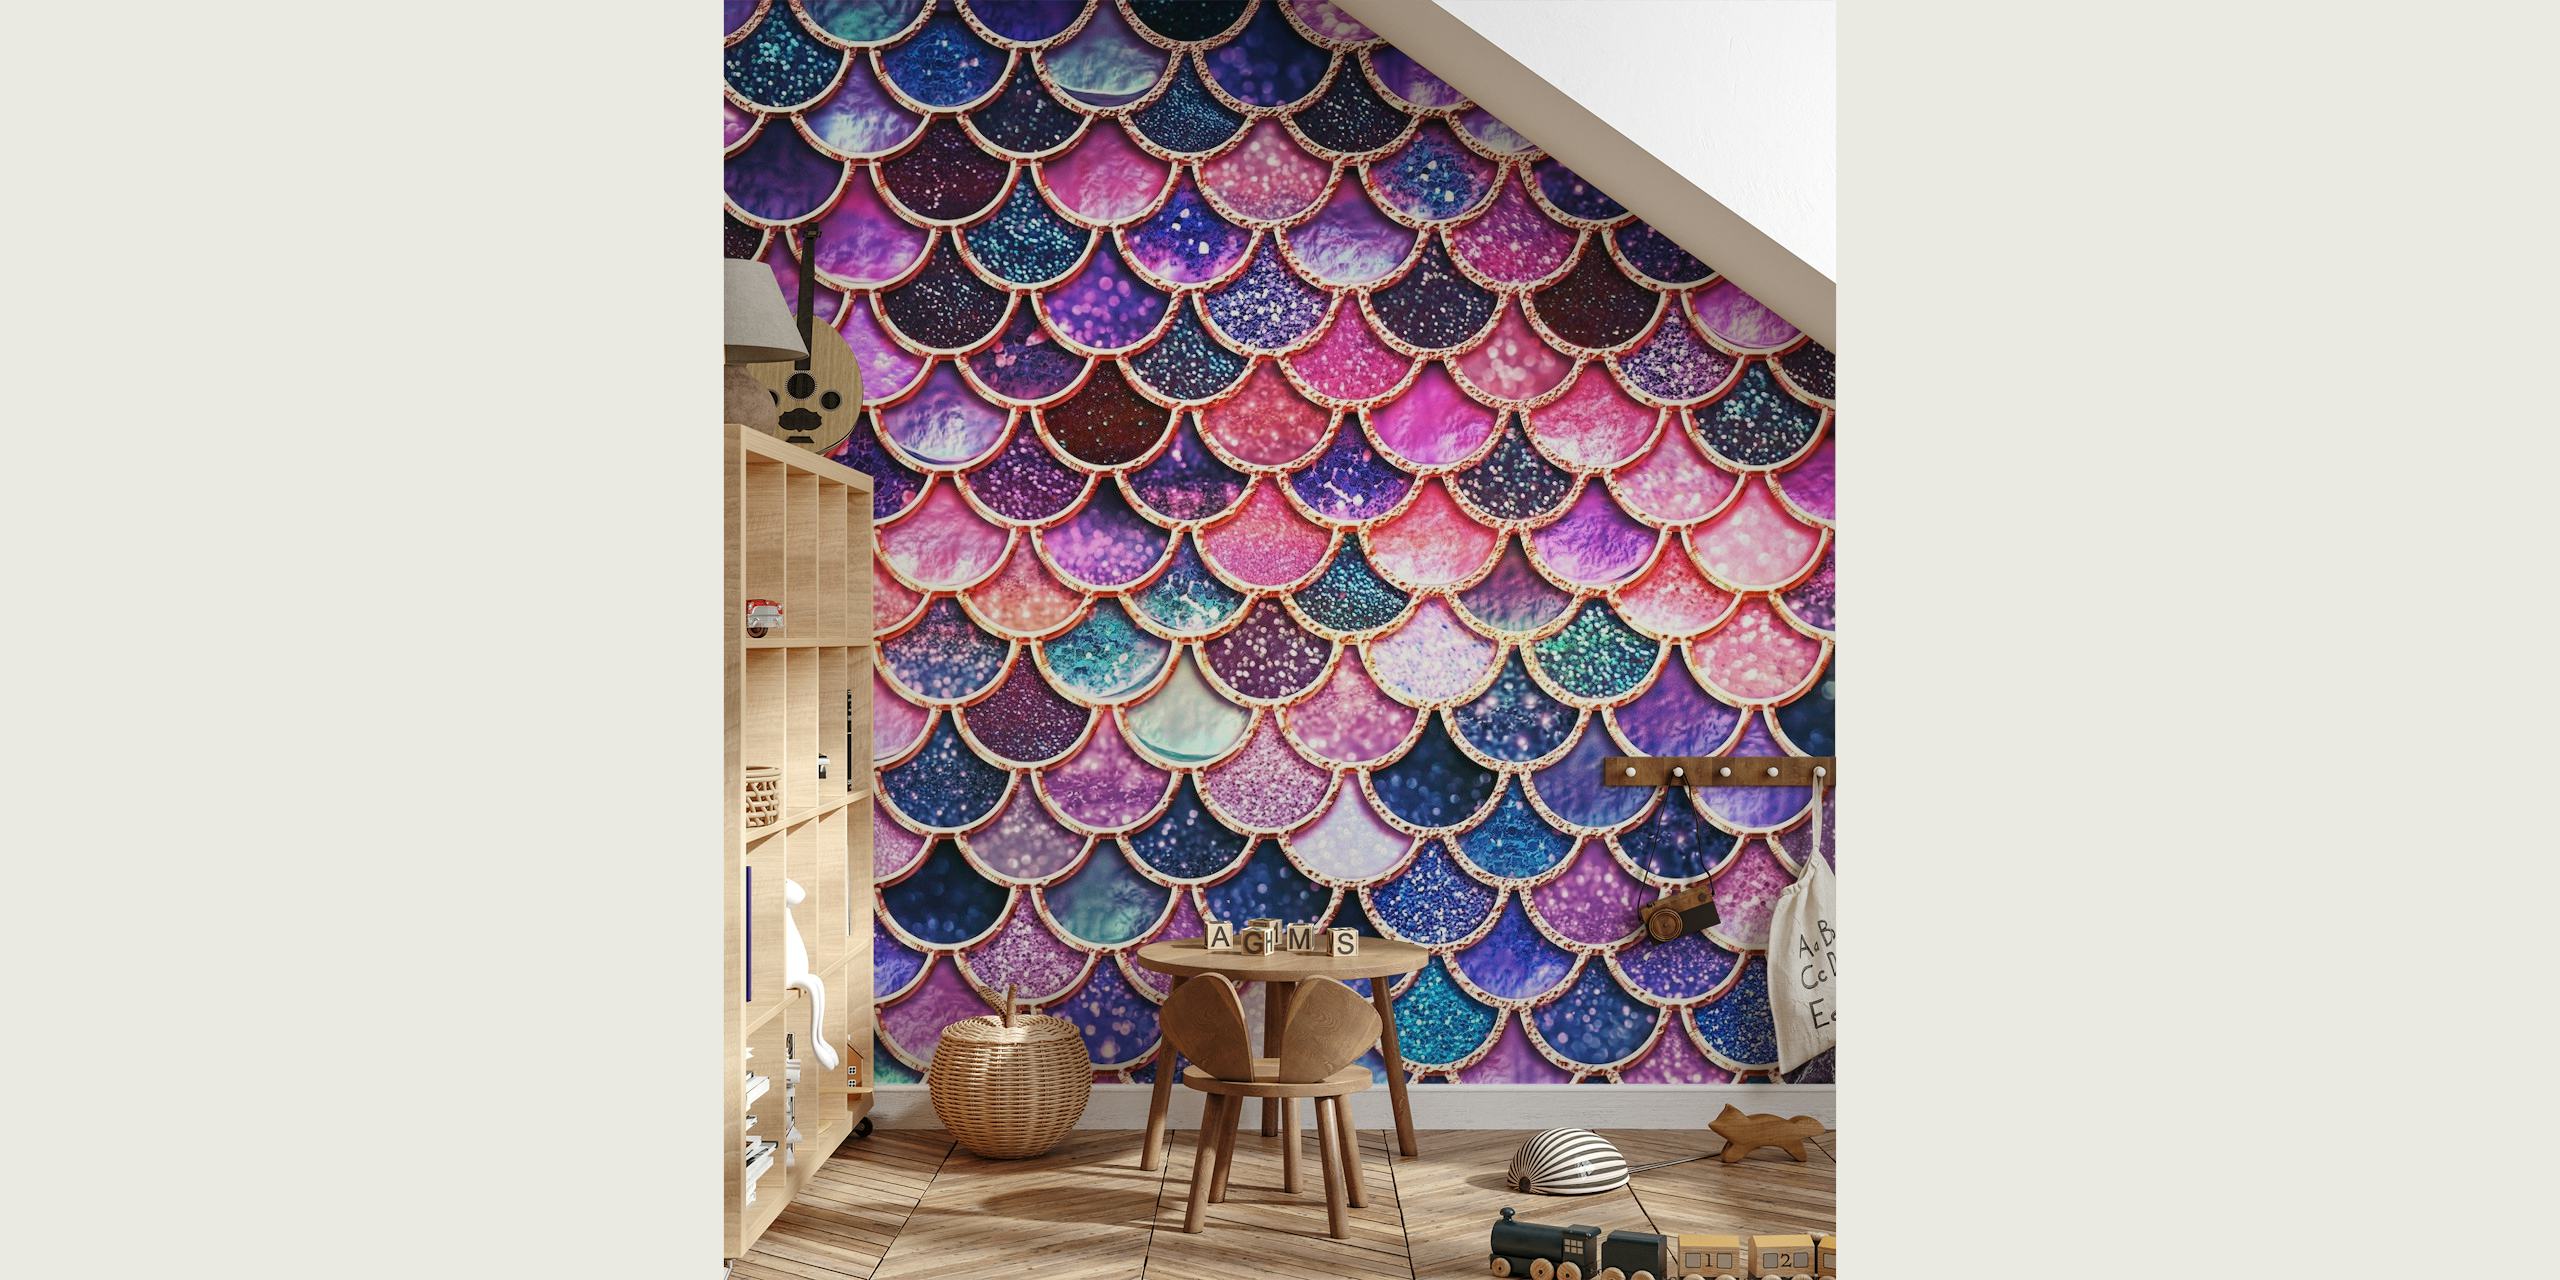 Magenta and blue mermaid scale pattern wall mural for interior decor